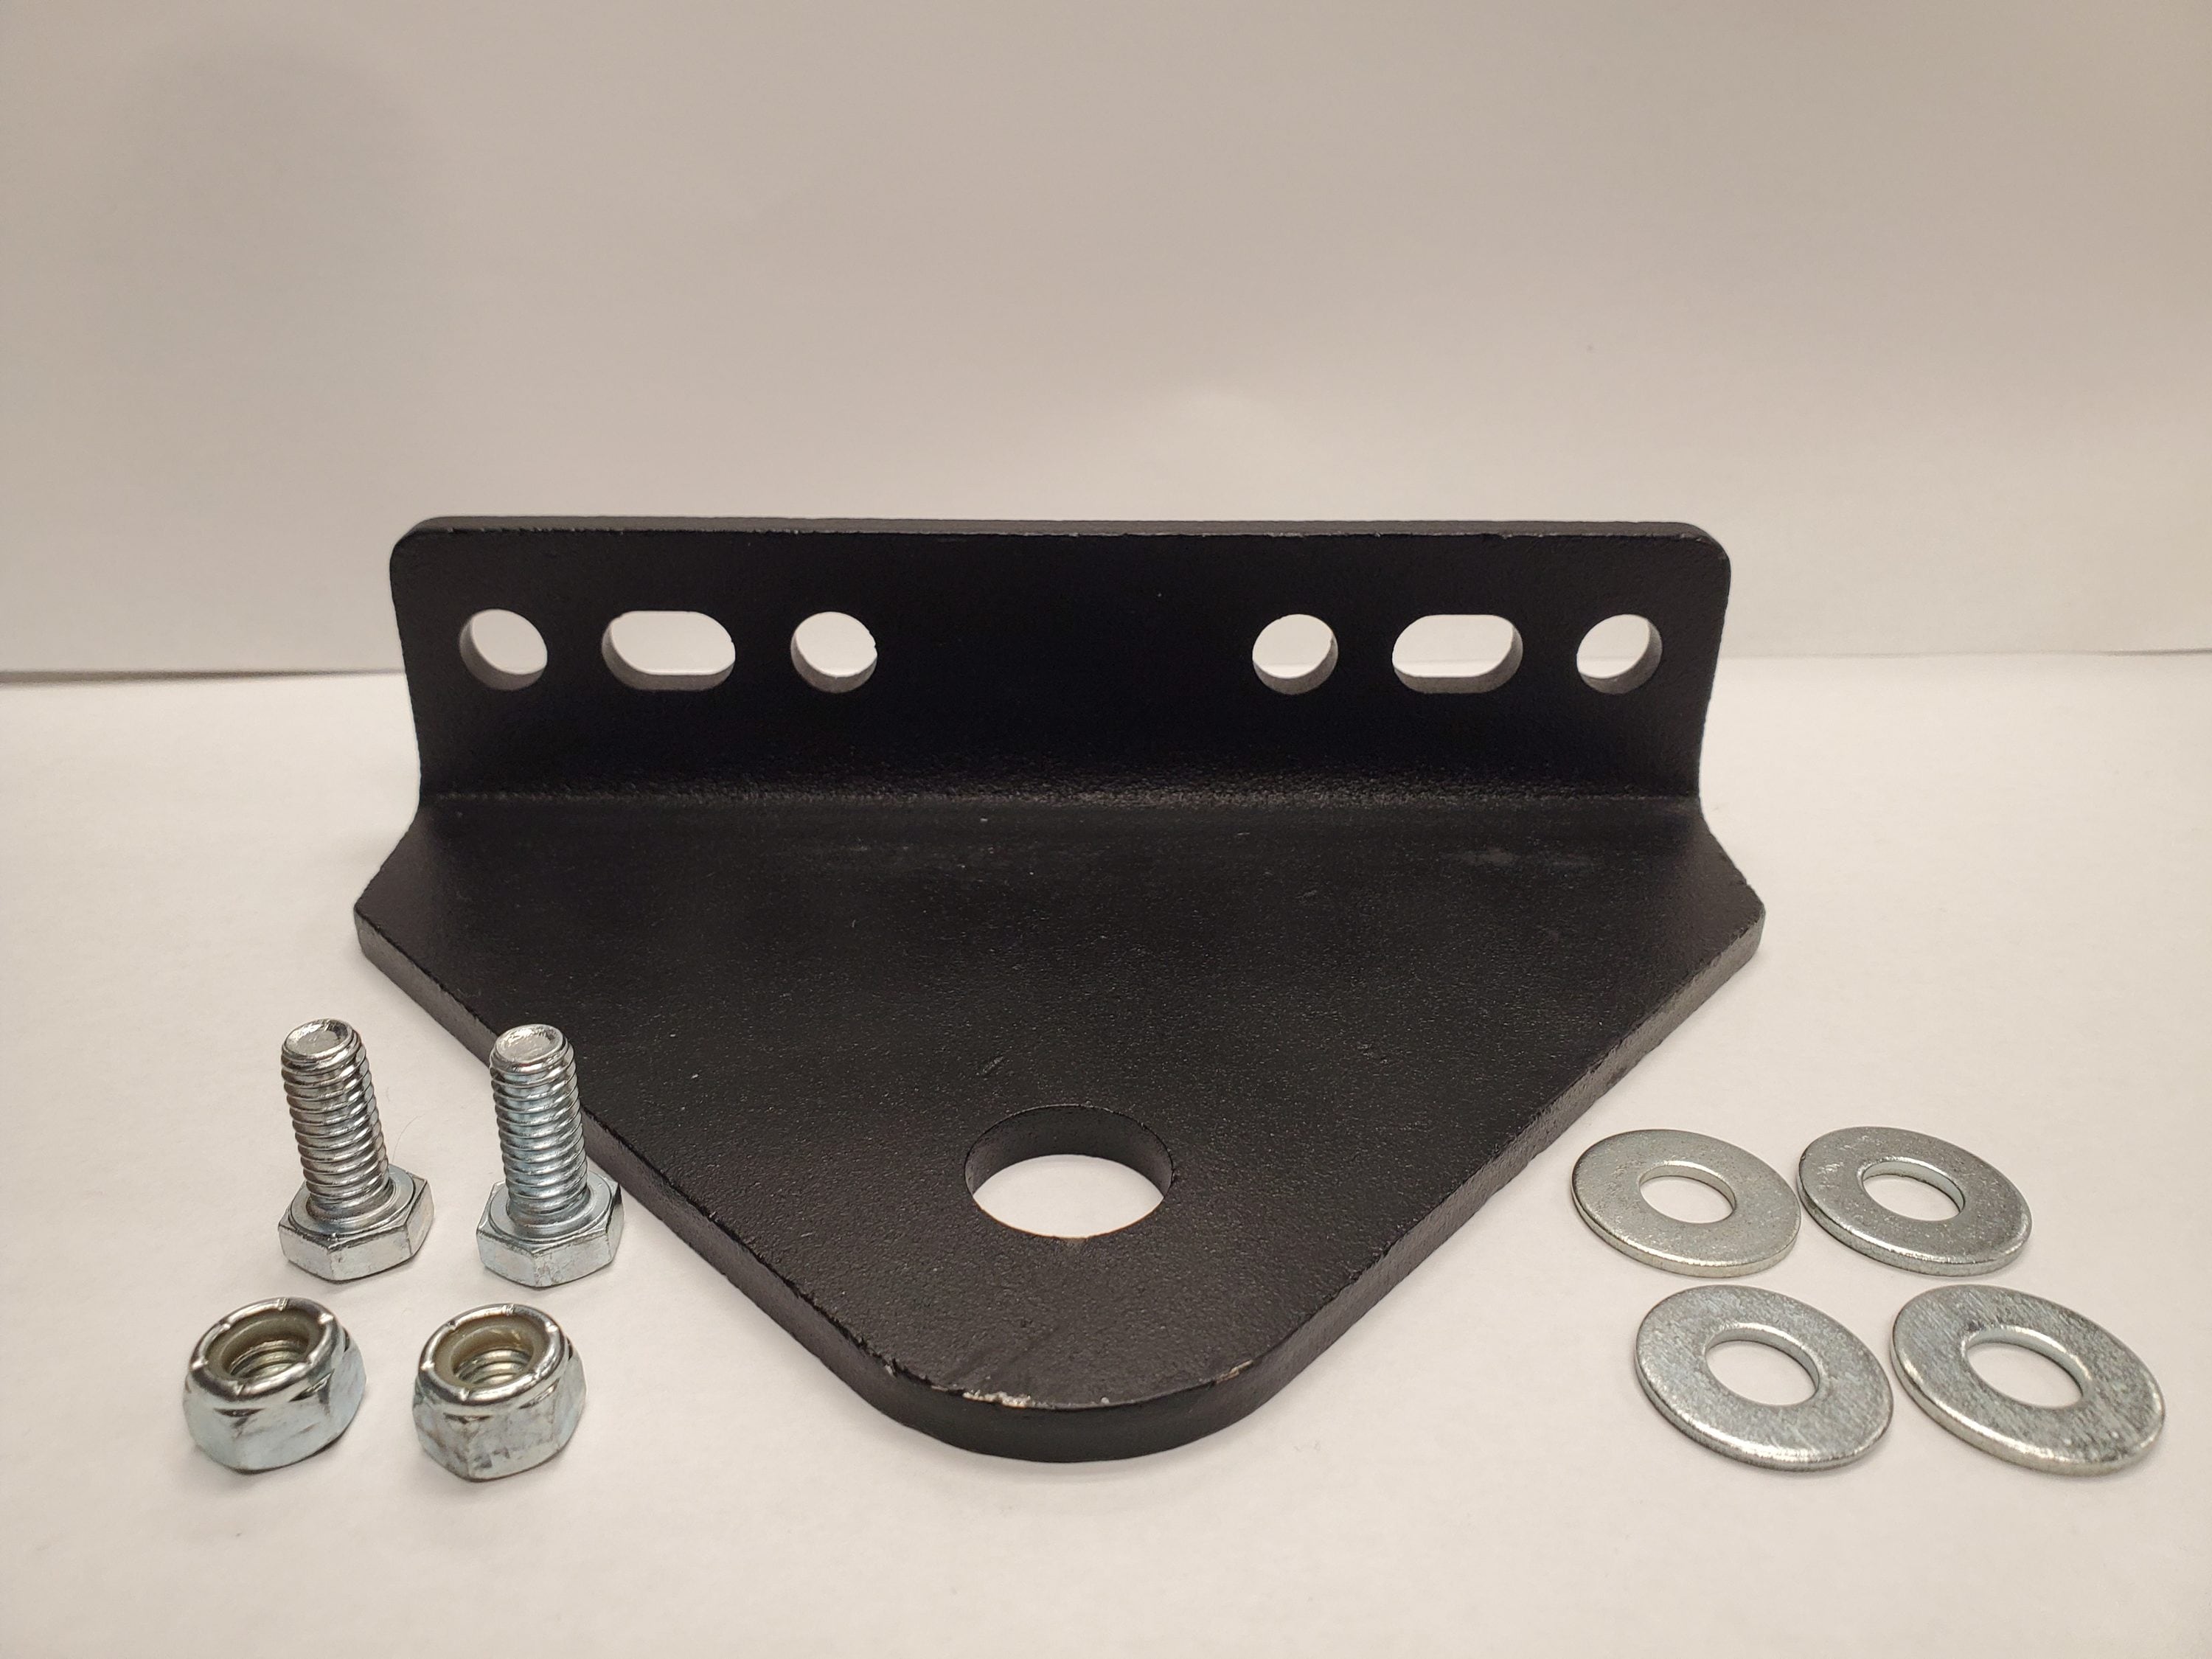 OxCart Hitch Kit for Zero-Turn Mowers (Fits Most Husqvarna, Cub Cadet, MTD,  Craftsman, Exmark, Scag, Toro, Bad Boy) in the Lawn Mower Parts department  at